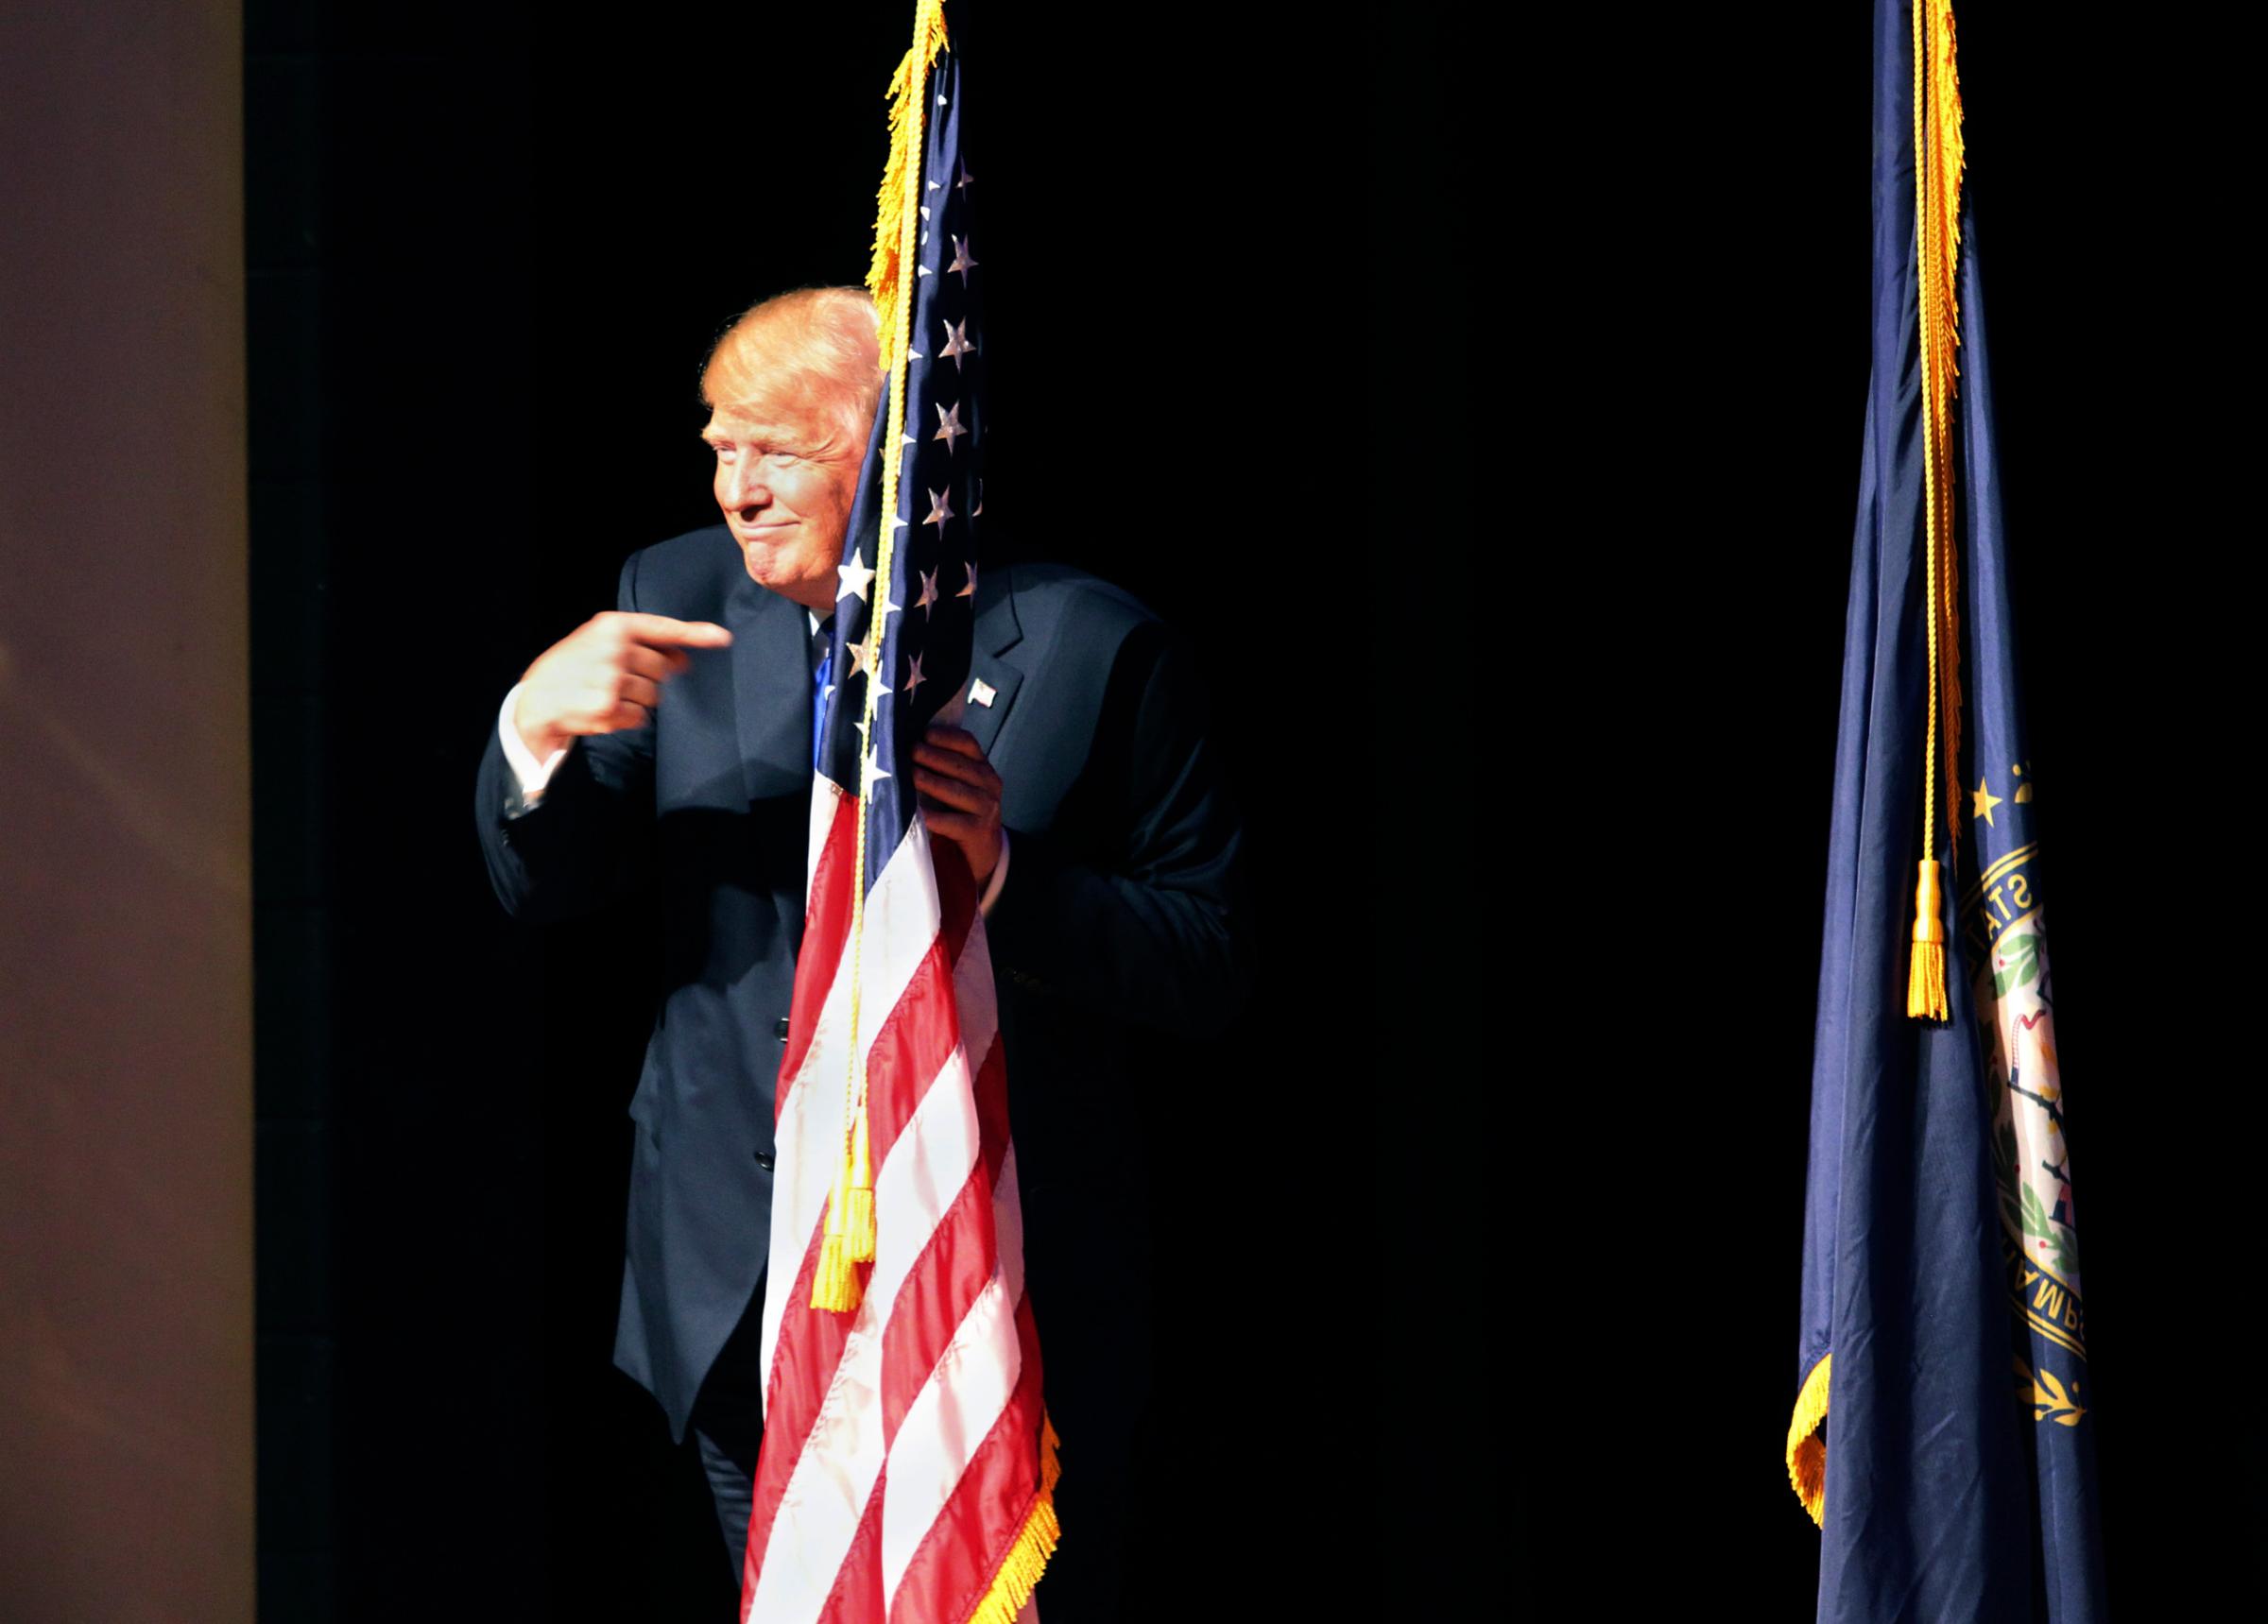 Republican presidential candidate Donald Trump points to the American flag as he takes the stage to speak to a campaign town hall at Pinkerton Academy in Derry, N.H. on Aug. 19, 2015.